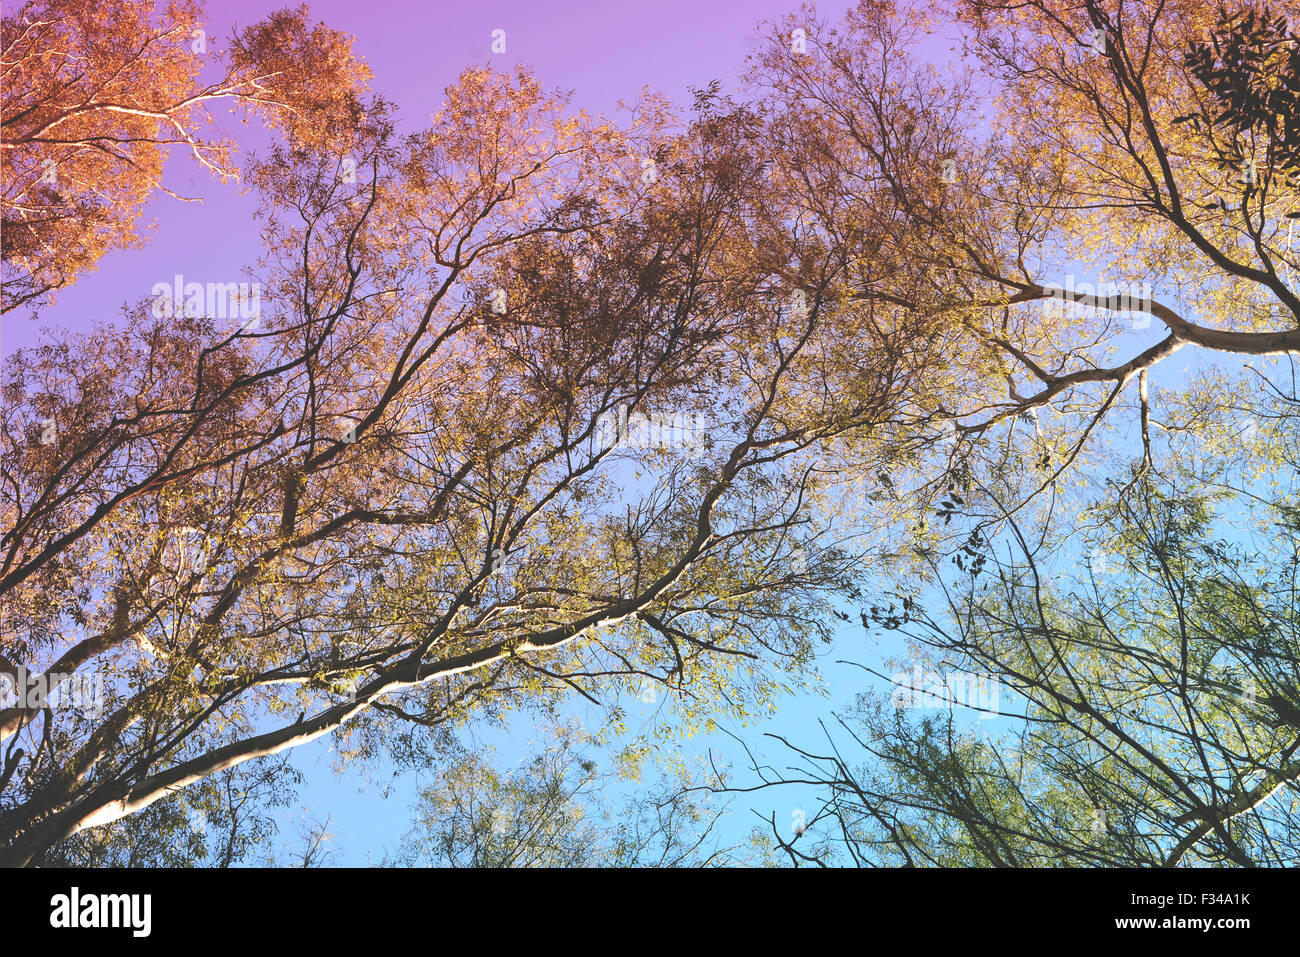 Branch trees and colorful sky view from below with vintage style filter effect. Stock Photo